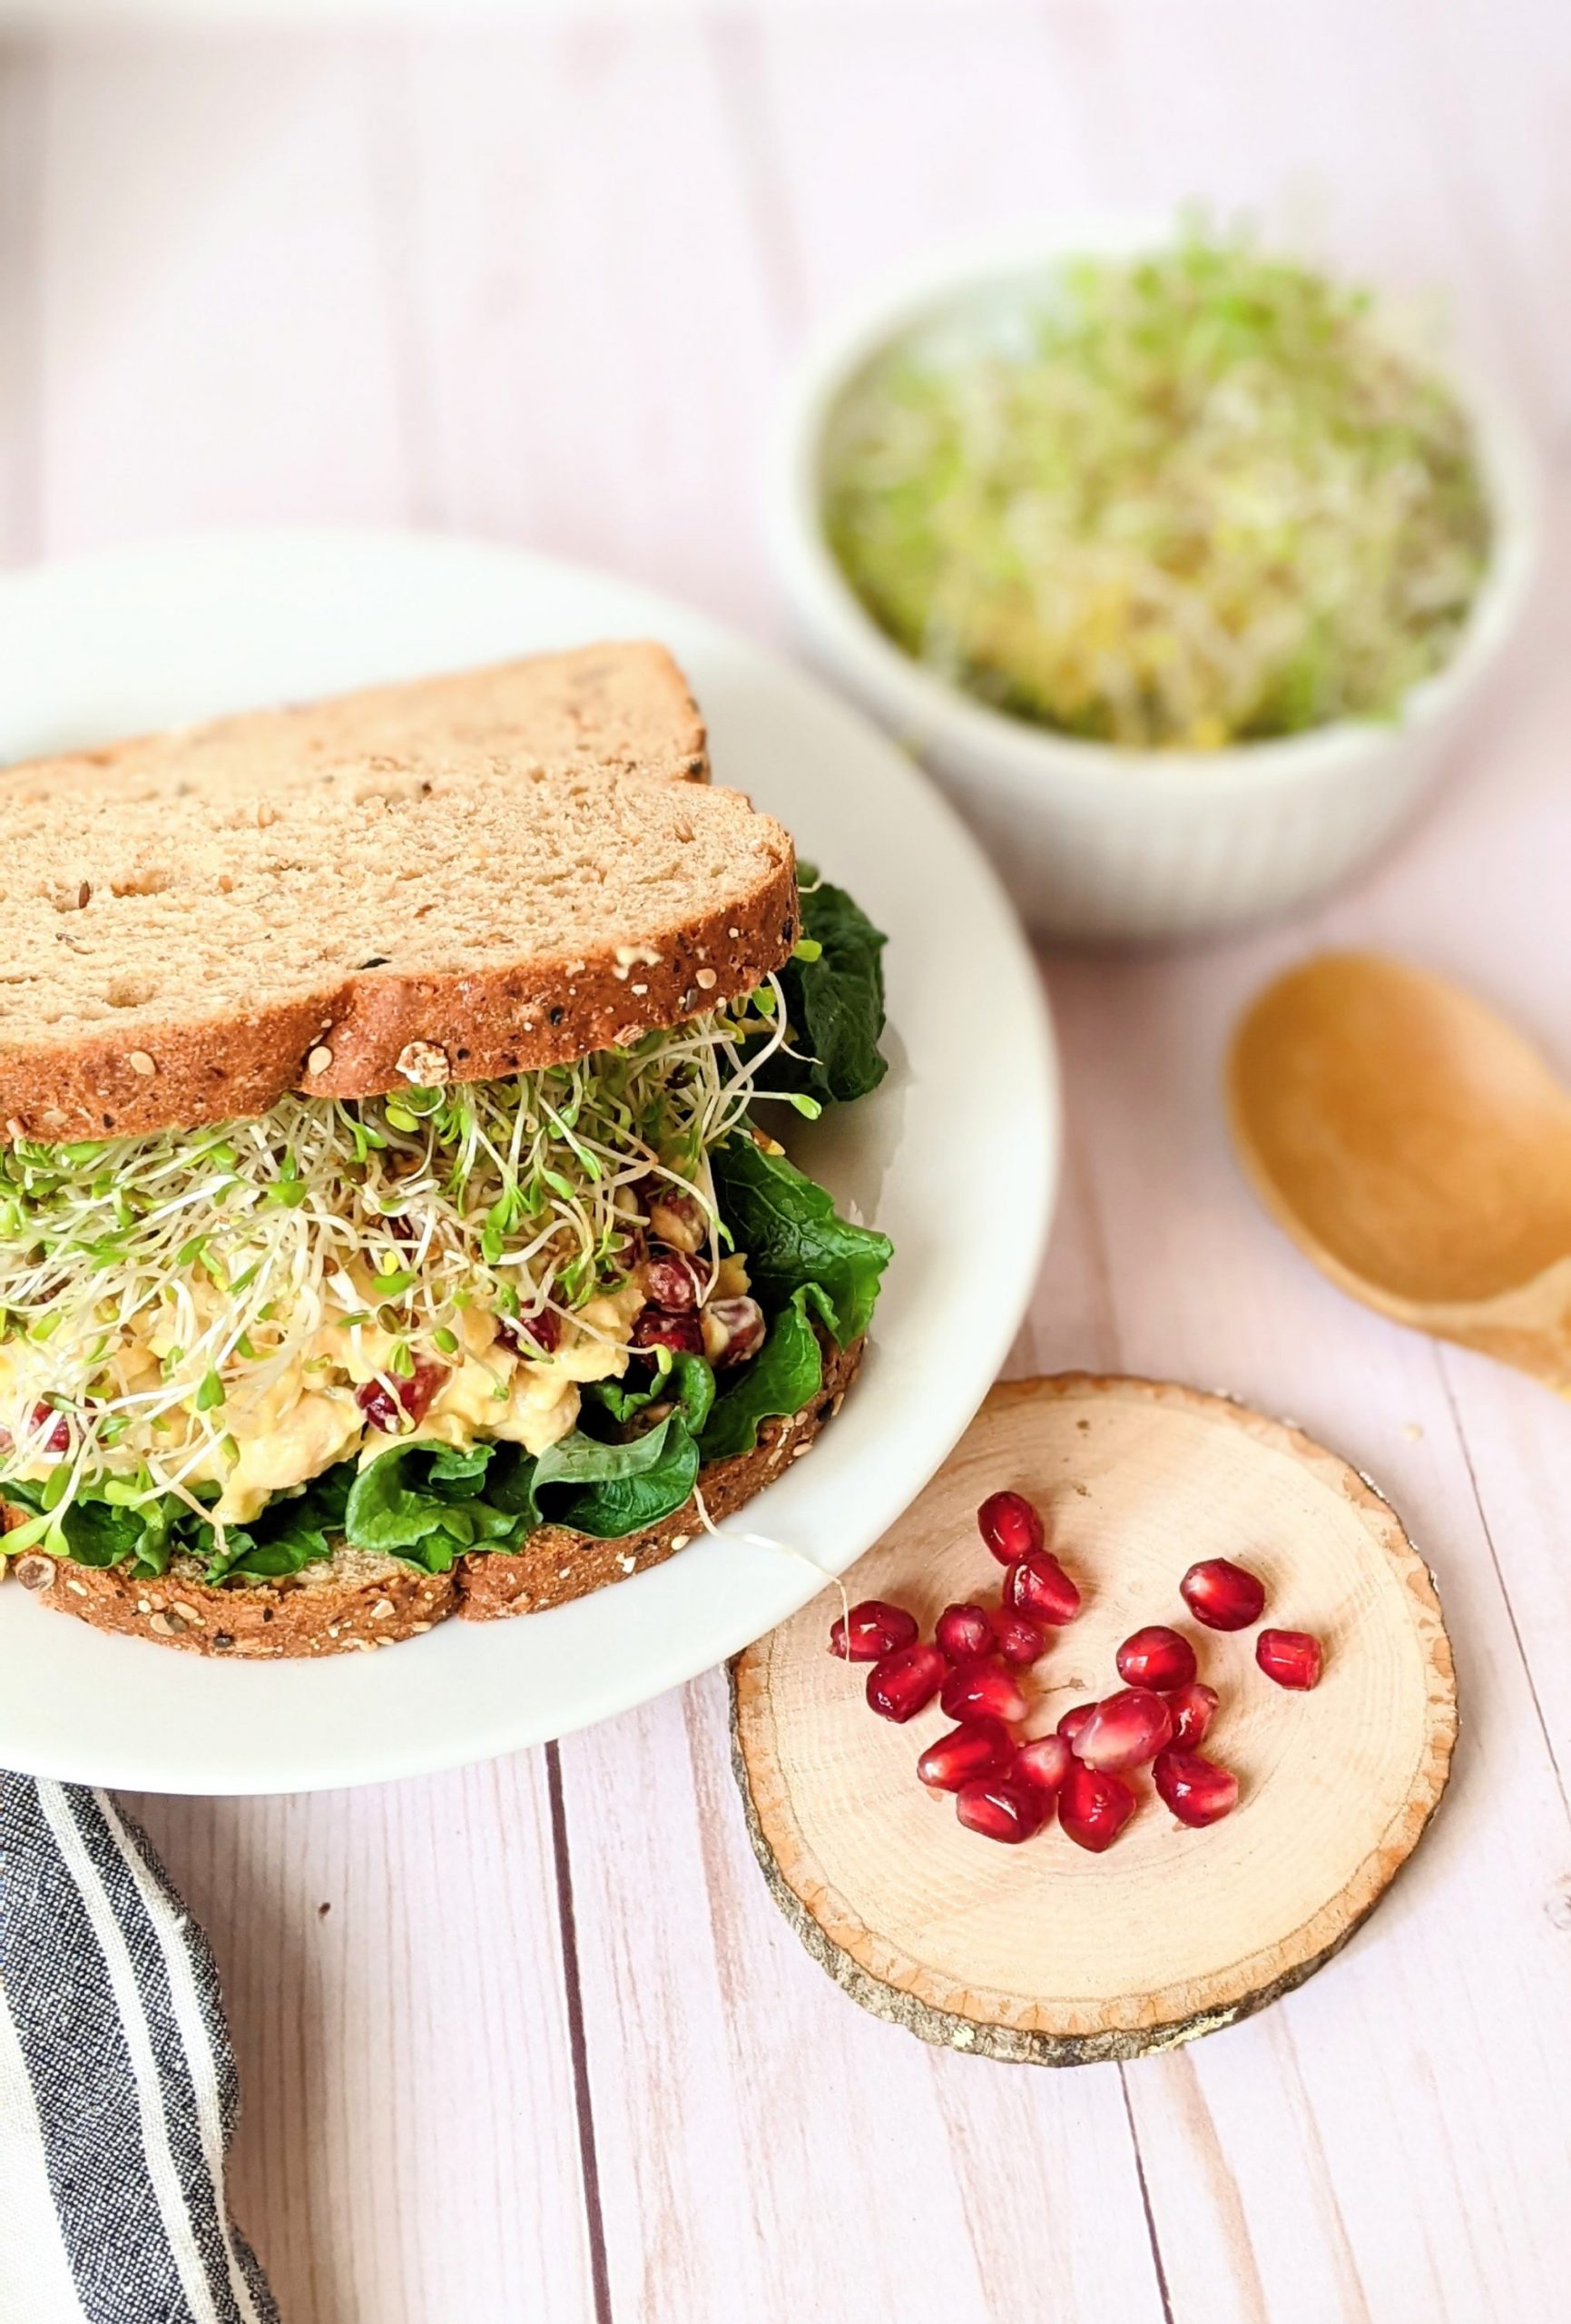 chickpea salad with pomegranate seeds mayo mustard lettuce alfalfa sprouts and relish sandwich recipe vegan gluten free